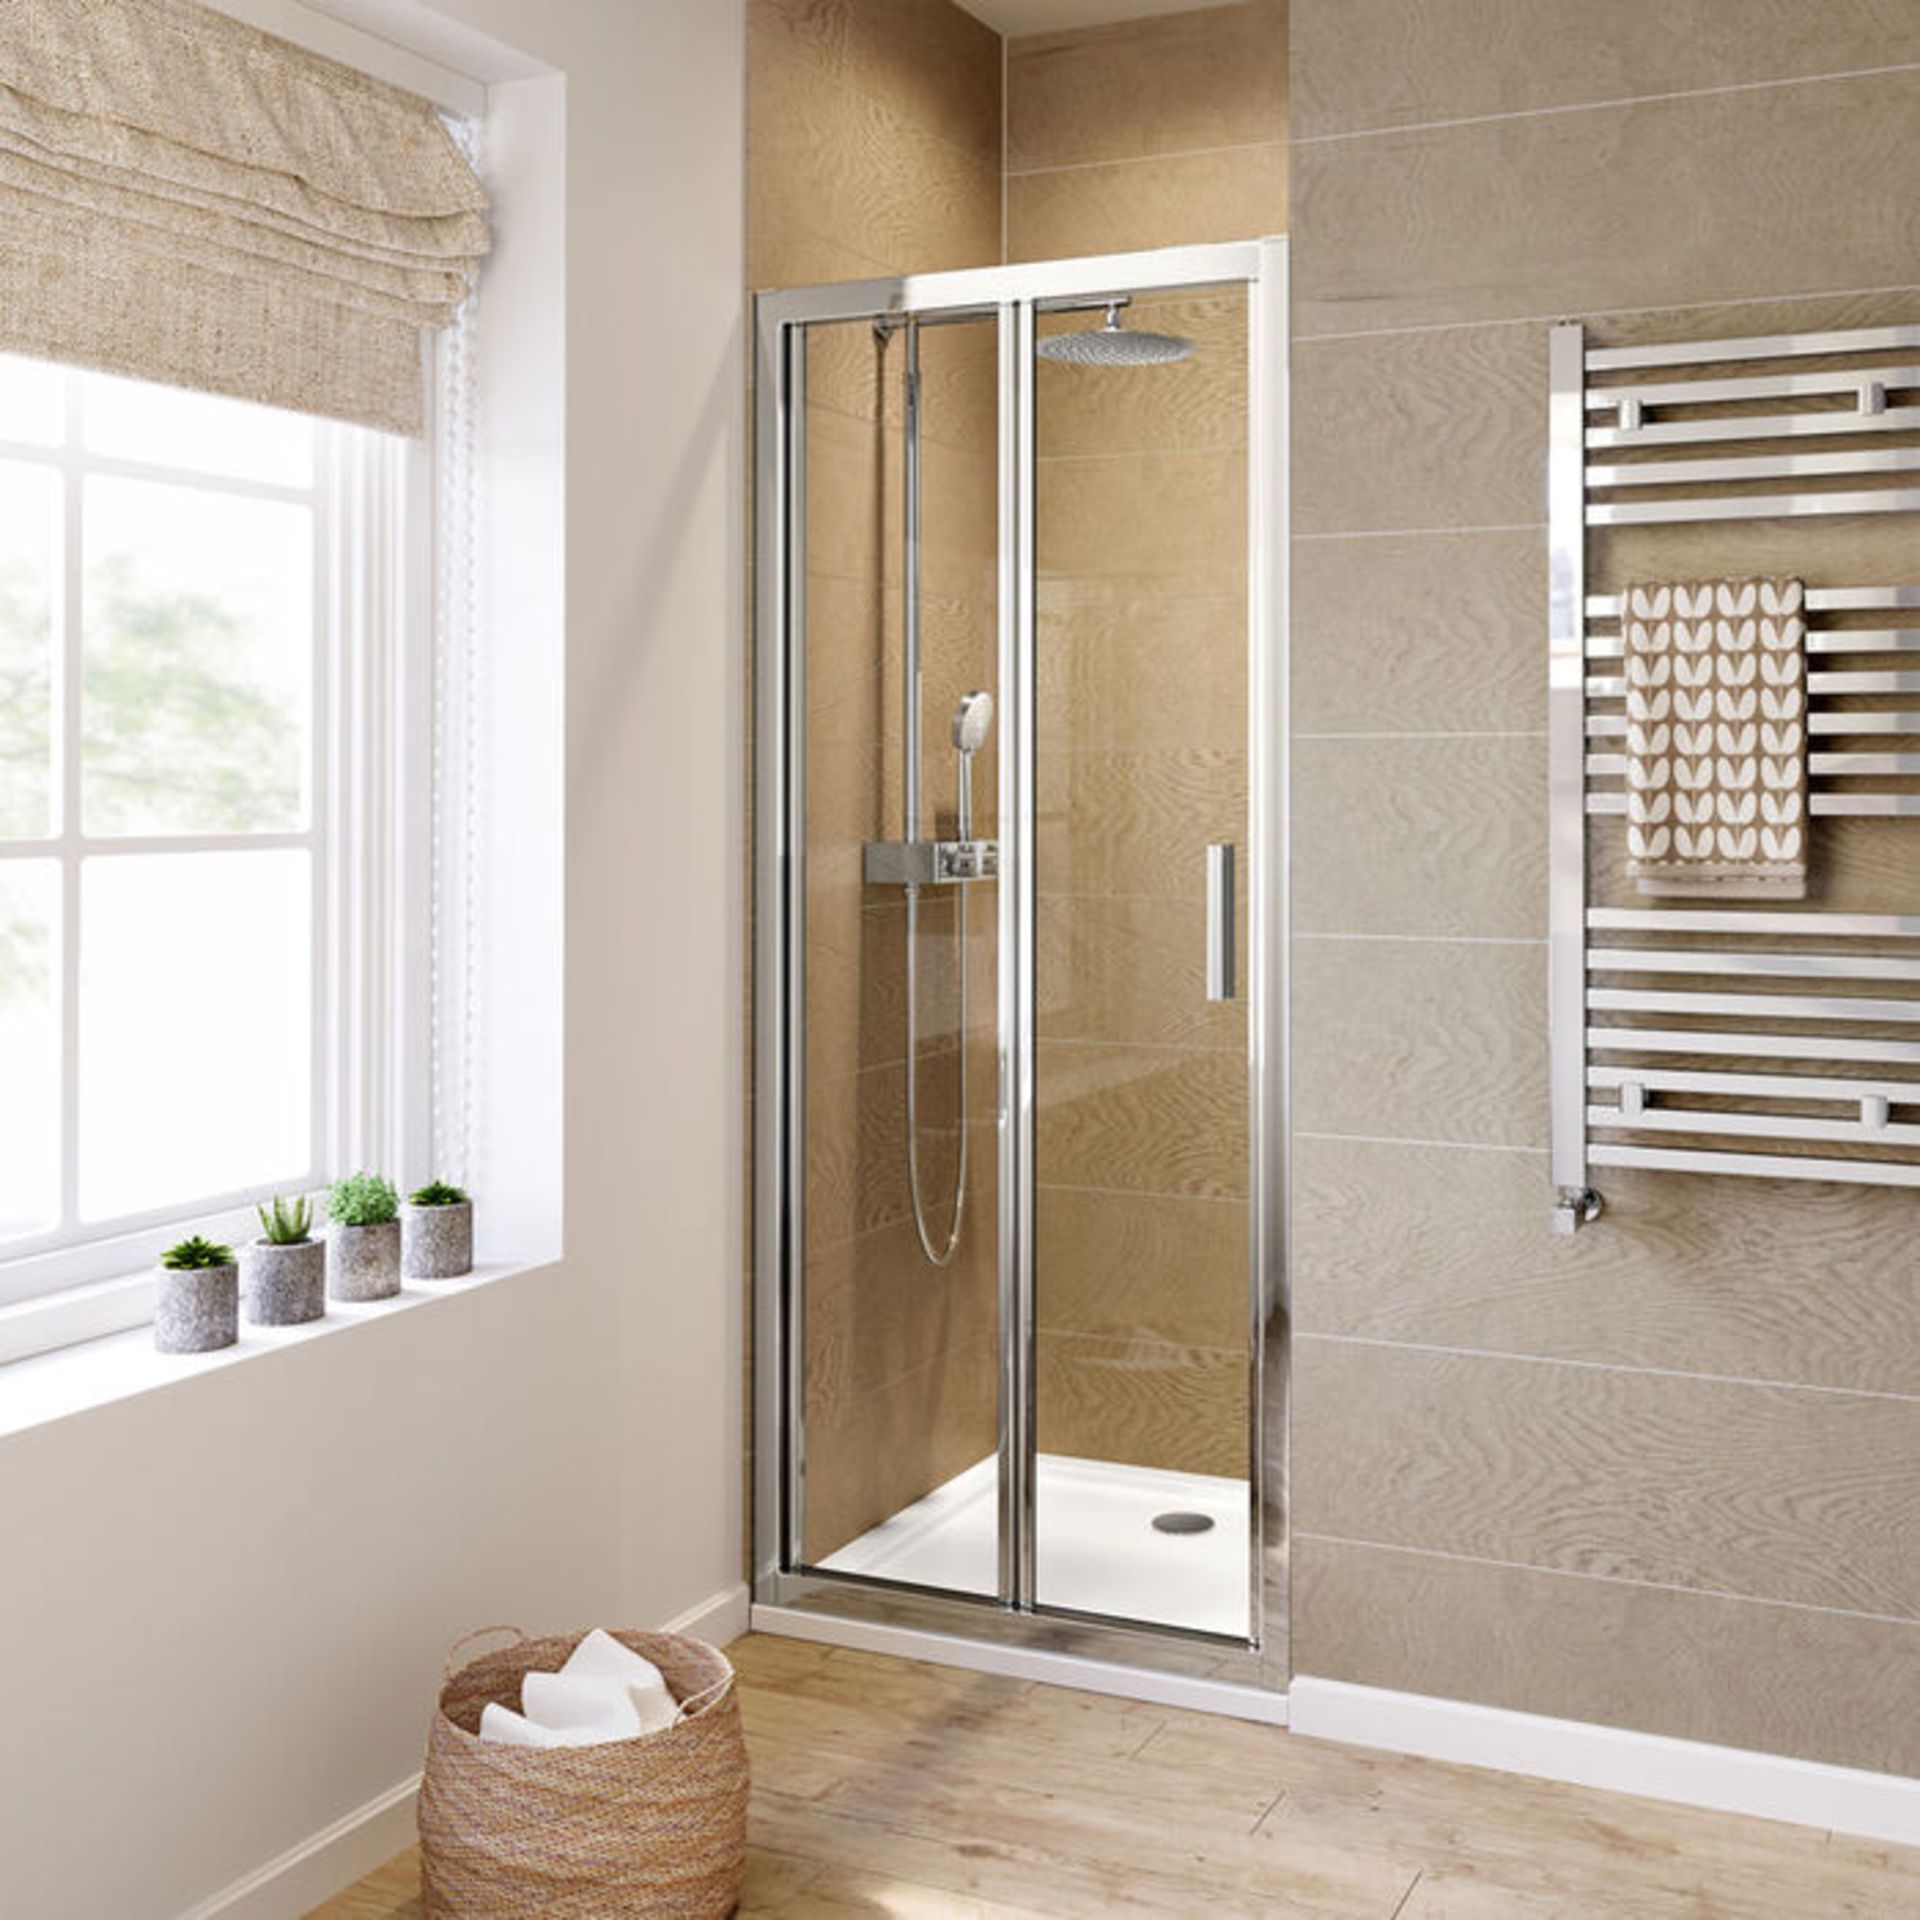 (H95) 800mm - 6mm - Elements EasyClean Bifold Shower Door. RRP £299.99. mm Safety Glass - Sing... - Image 2 of 5